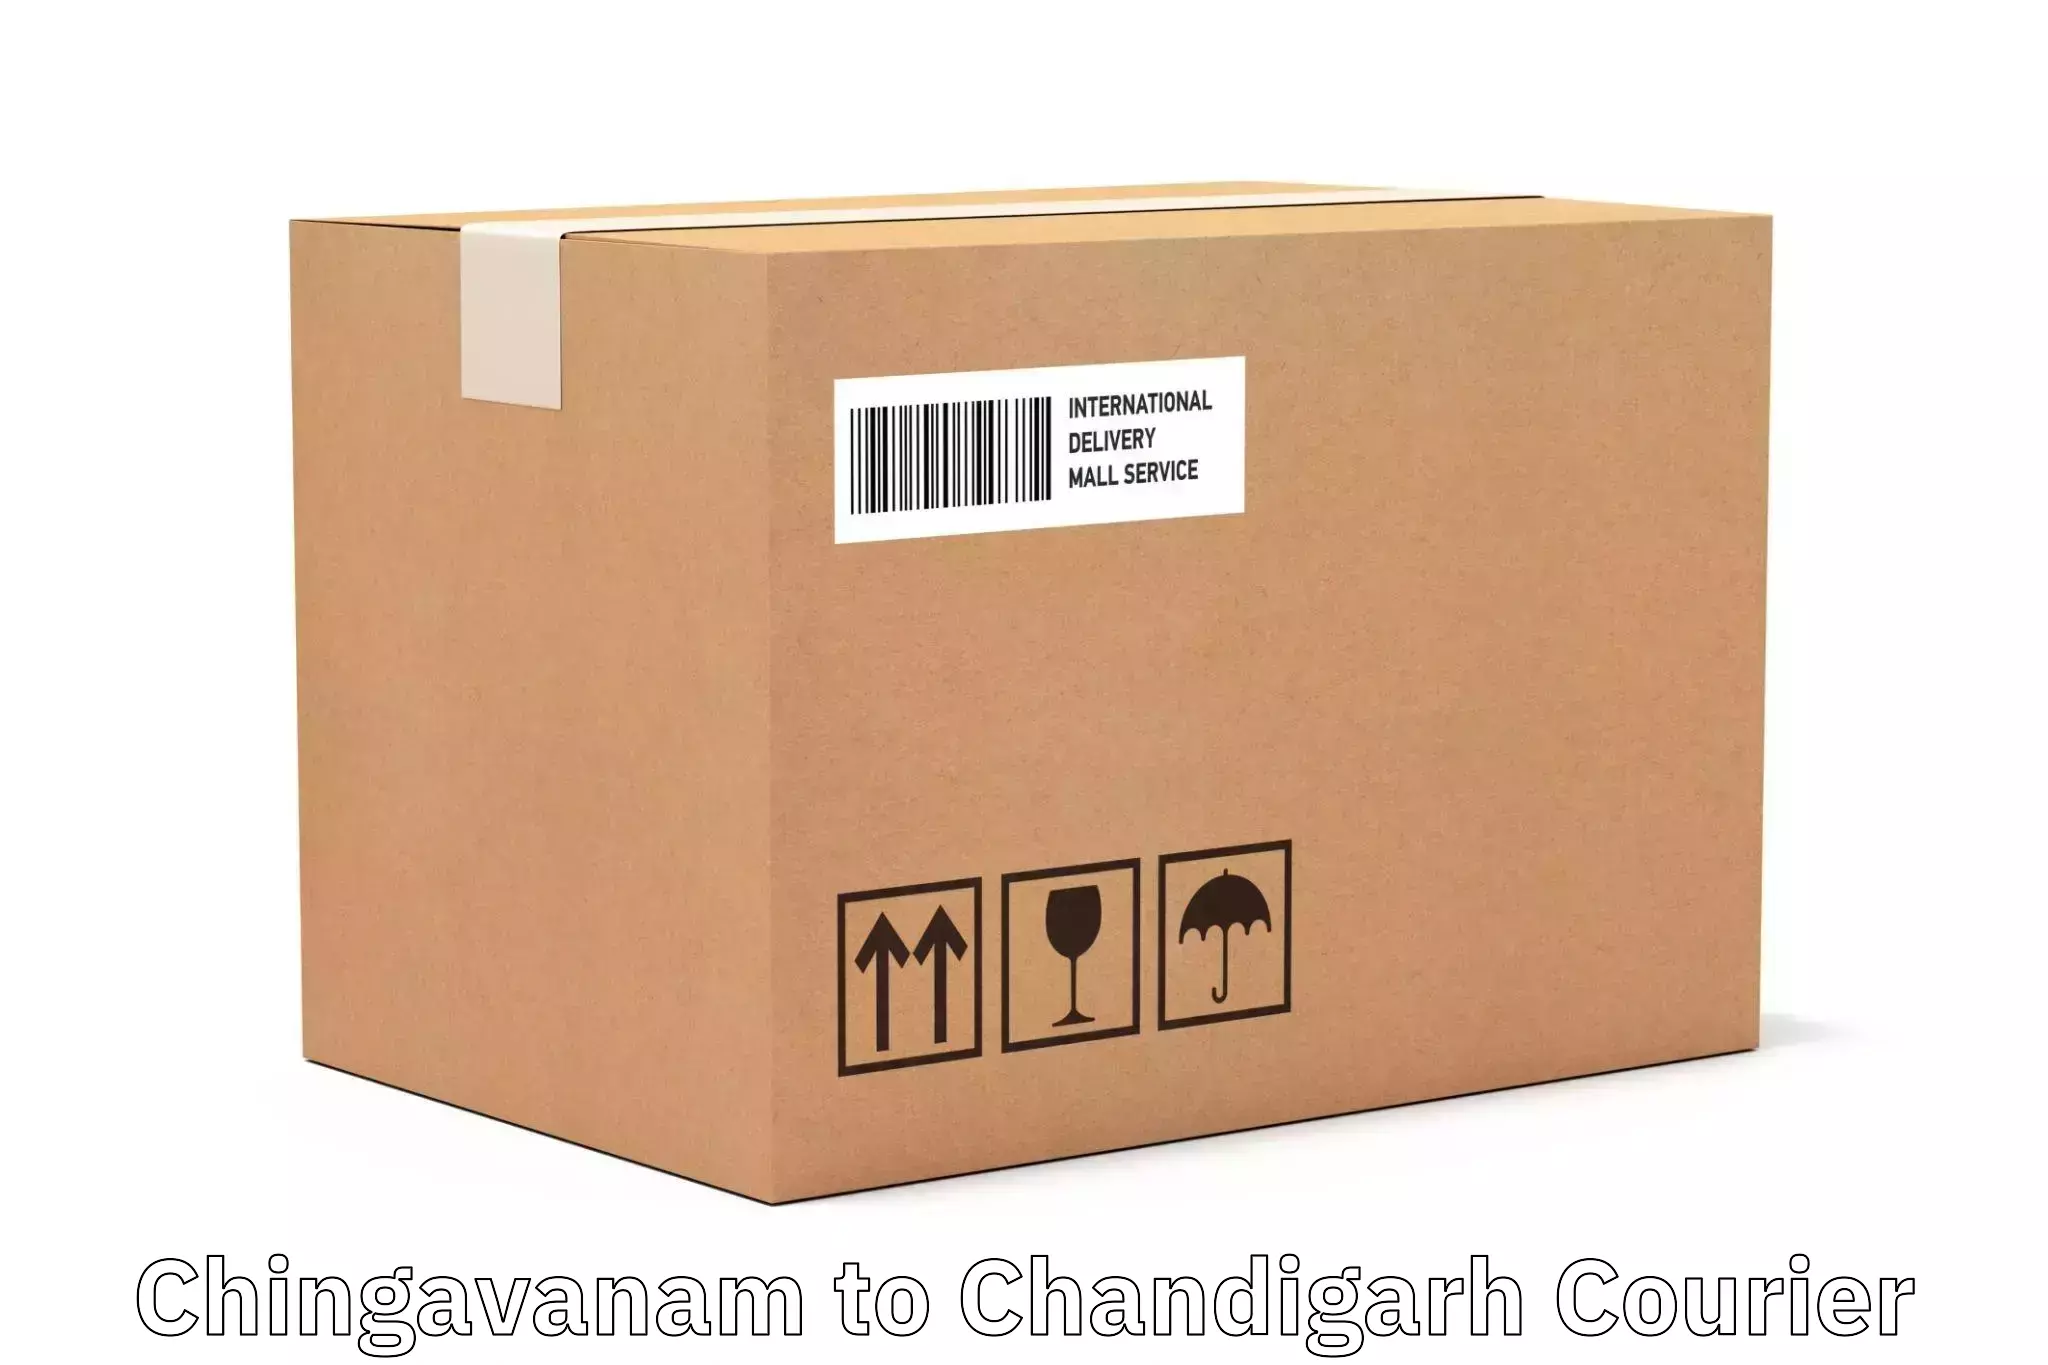 Package delivery network Chingavanam to Chandigarh